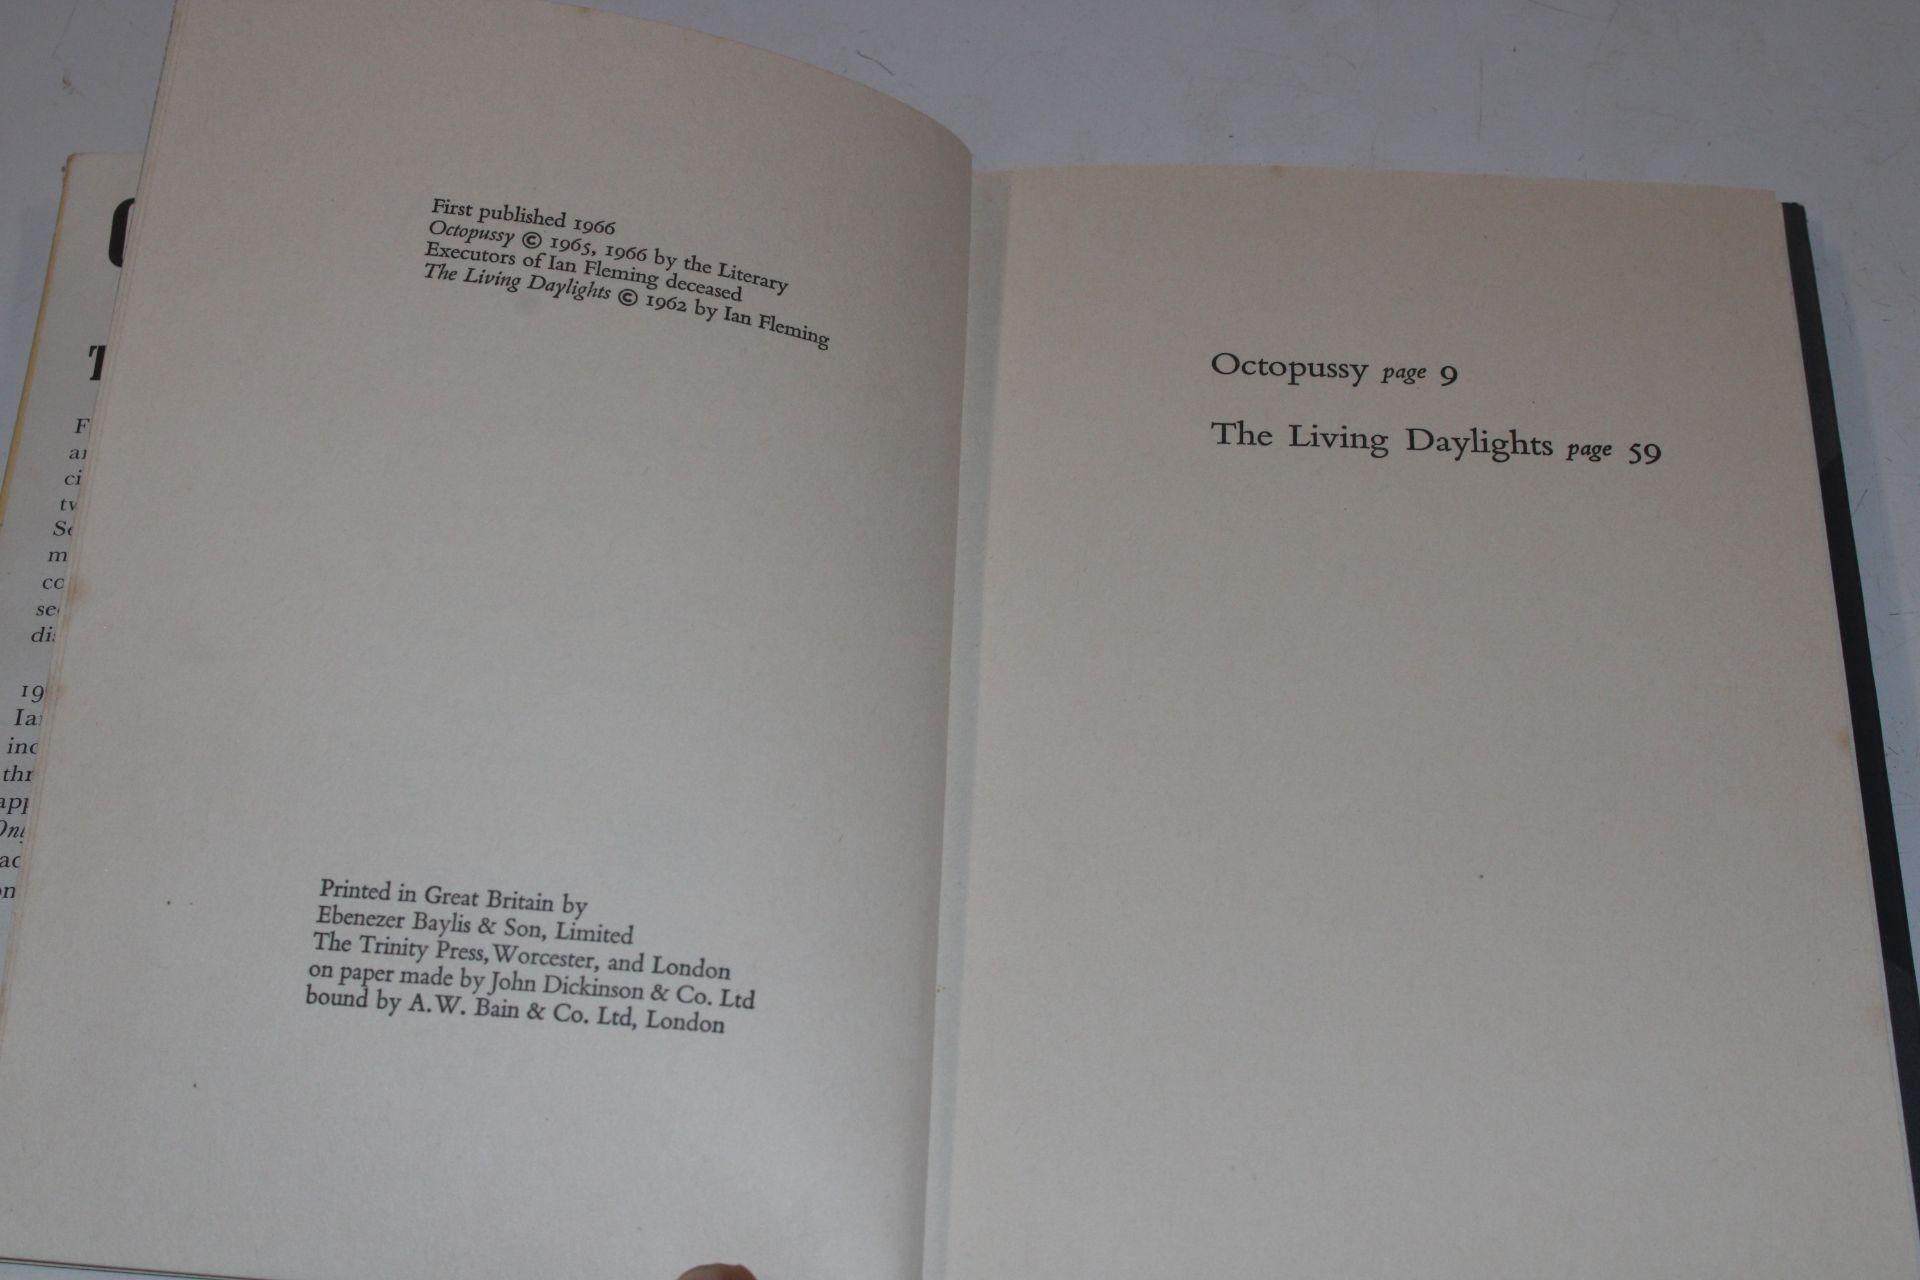 Ian Fleming, Octopussy and The Living Daylights, a - Image 4 of 7